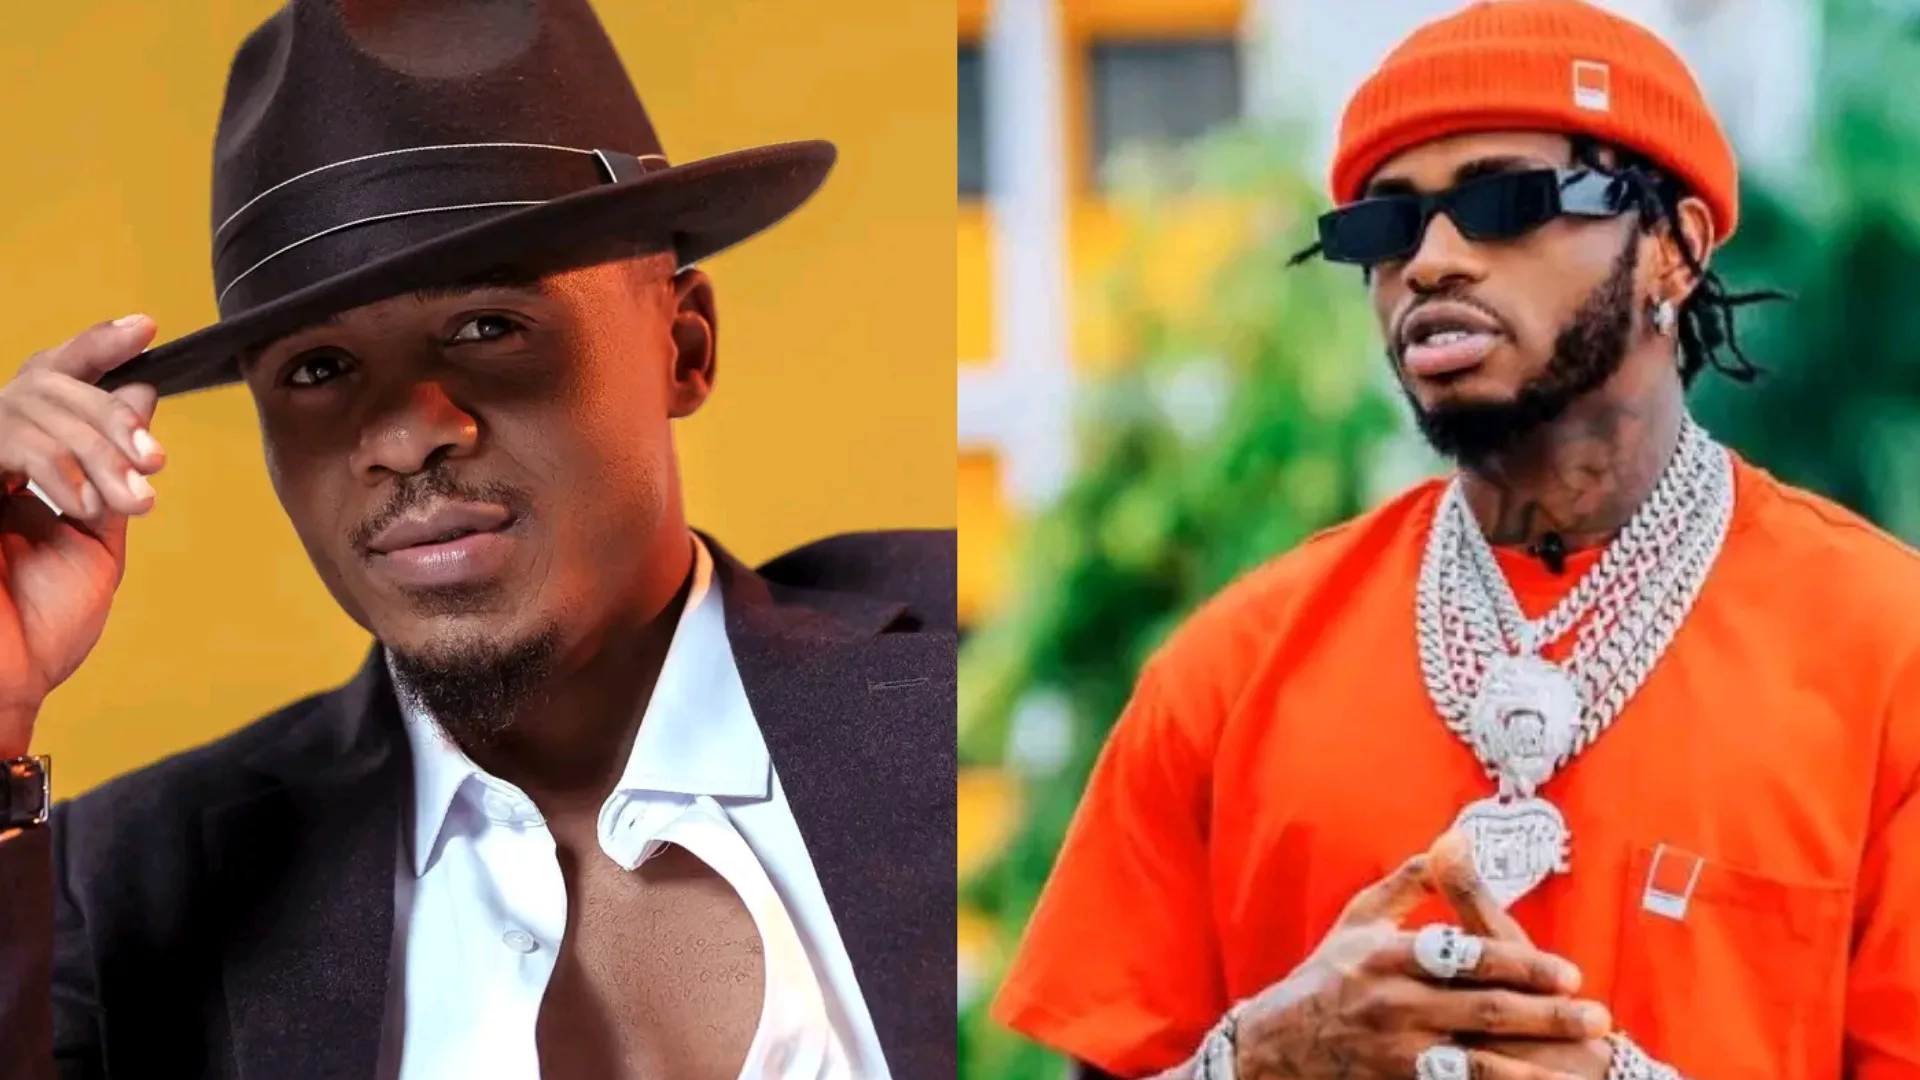 Master Jay says Diamond Platnumz is an entertainer while Alikiba is a singer